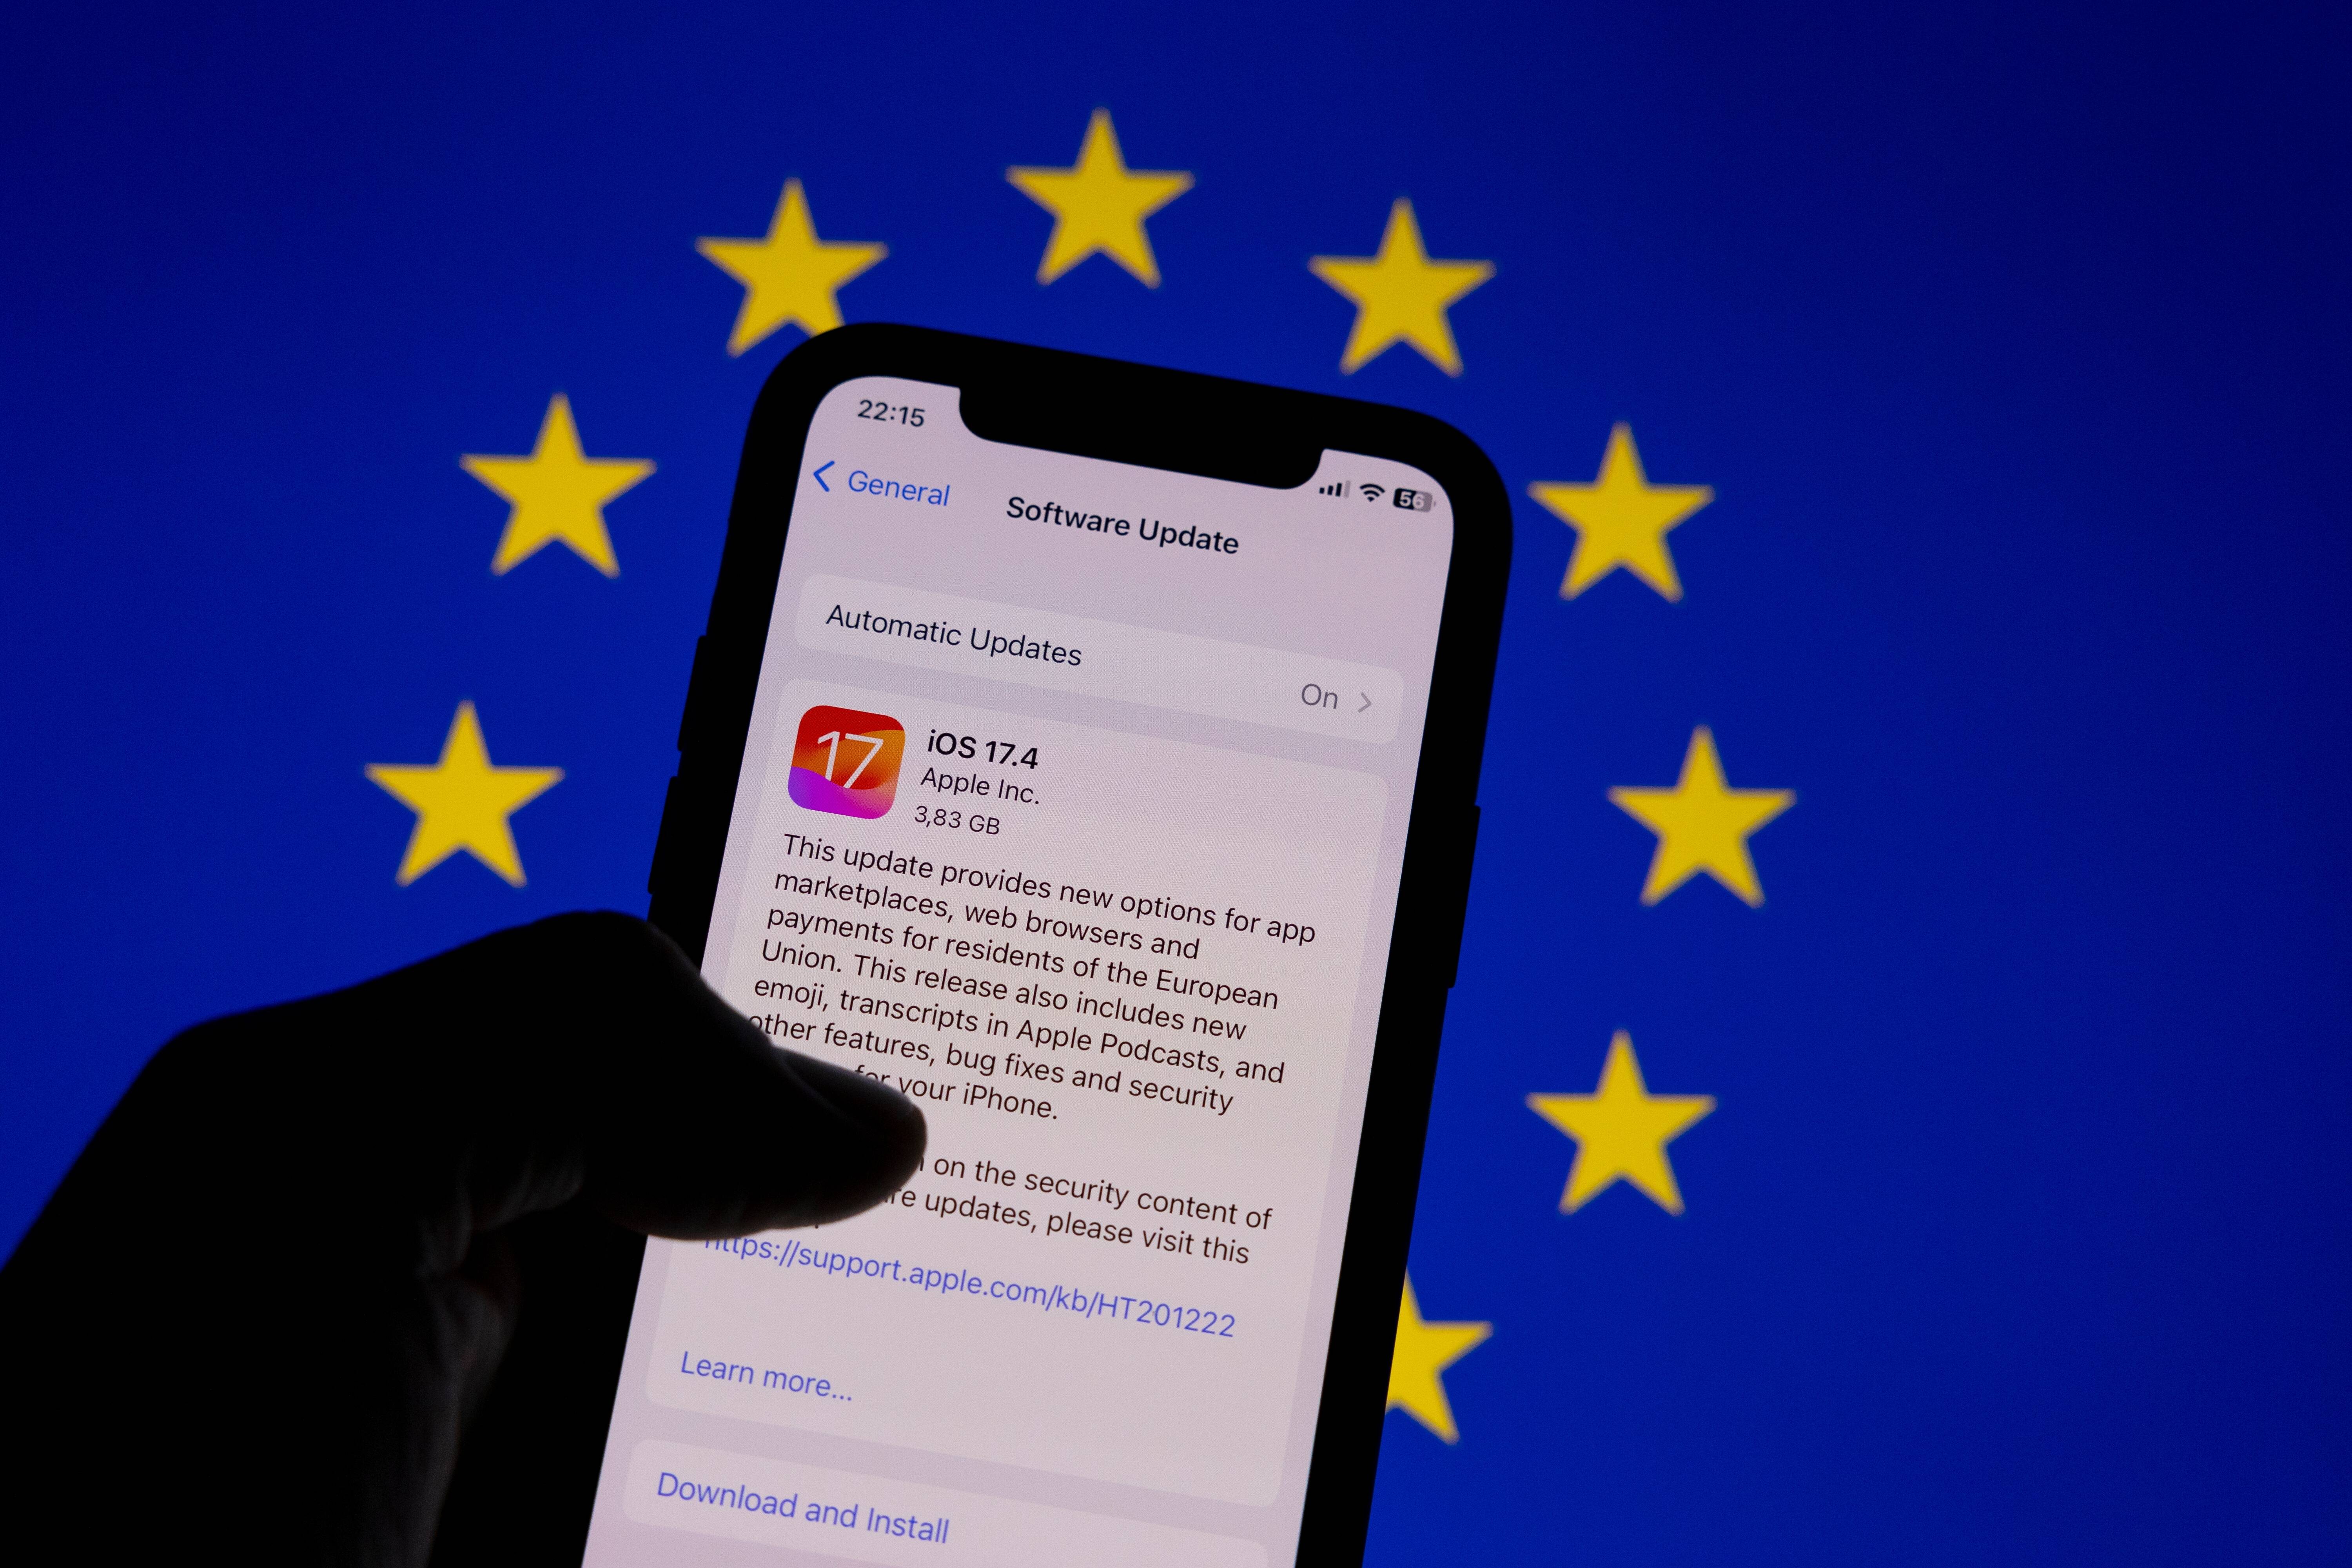 Apple limits third-party browser engine work to EU devices